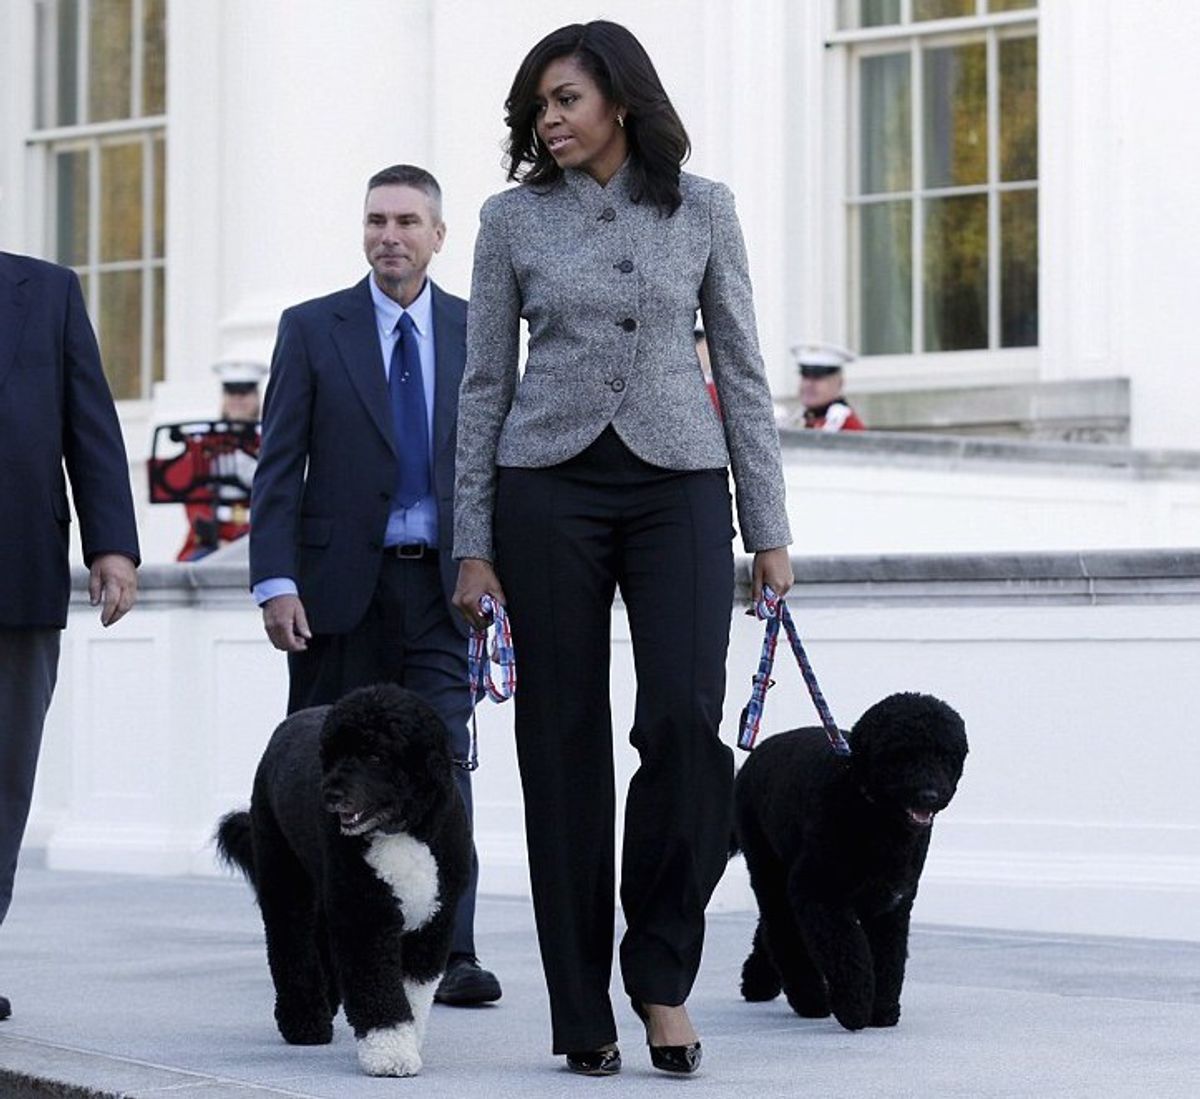 Top 7 Reasons Why We'll Miss Michelle Obama